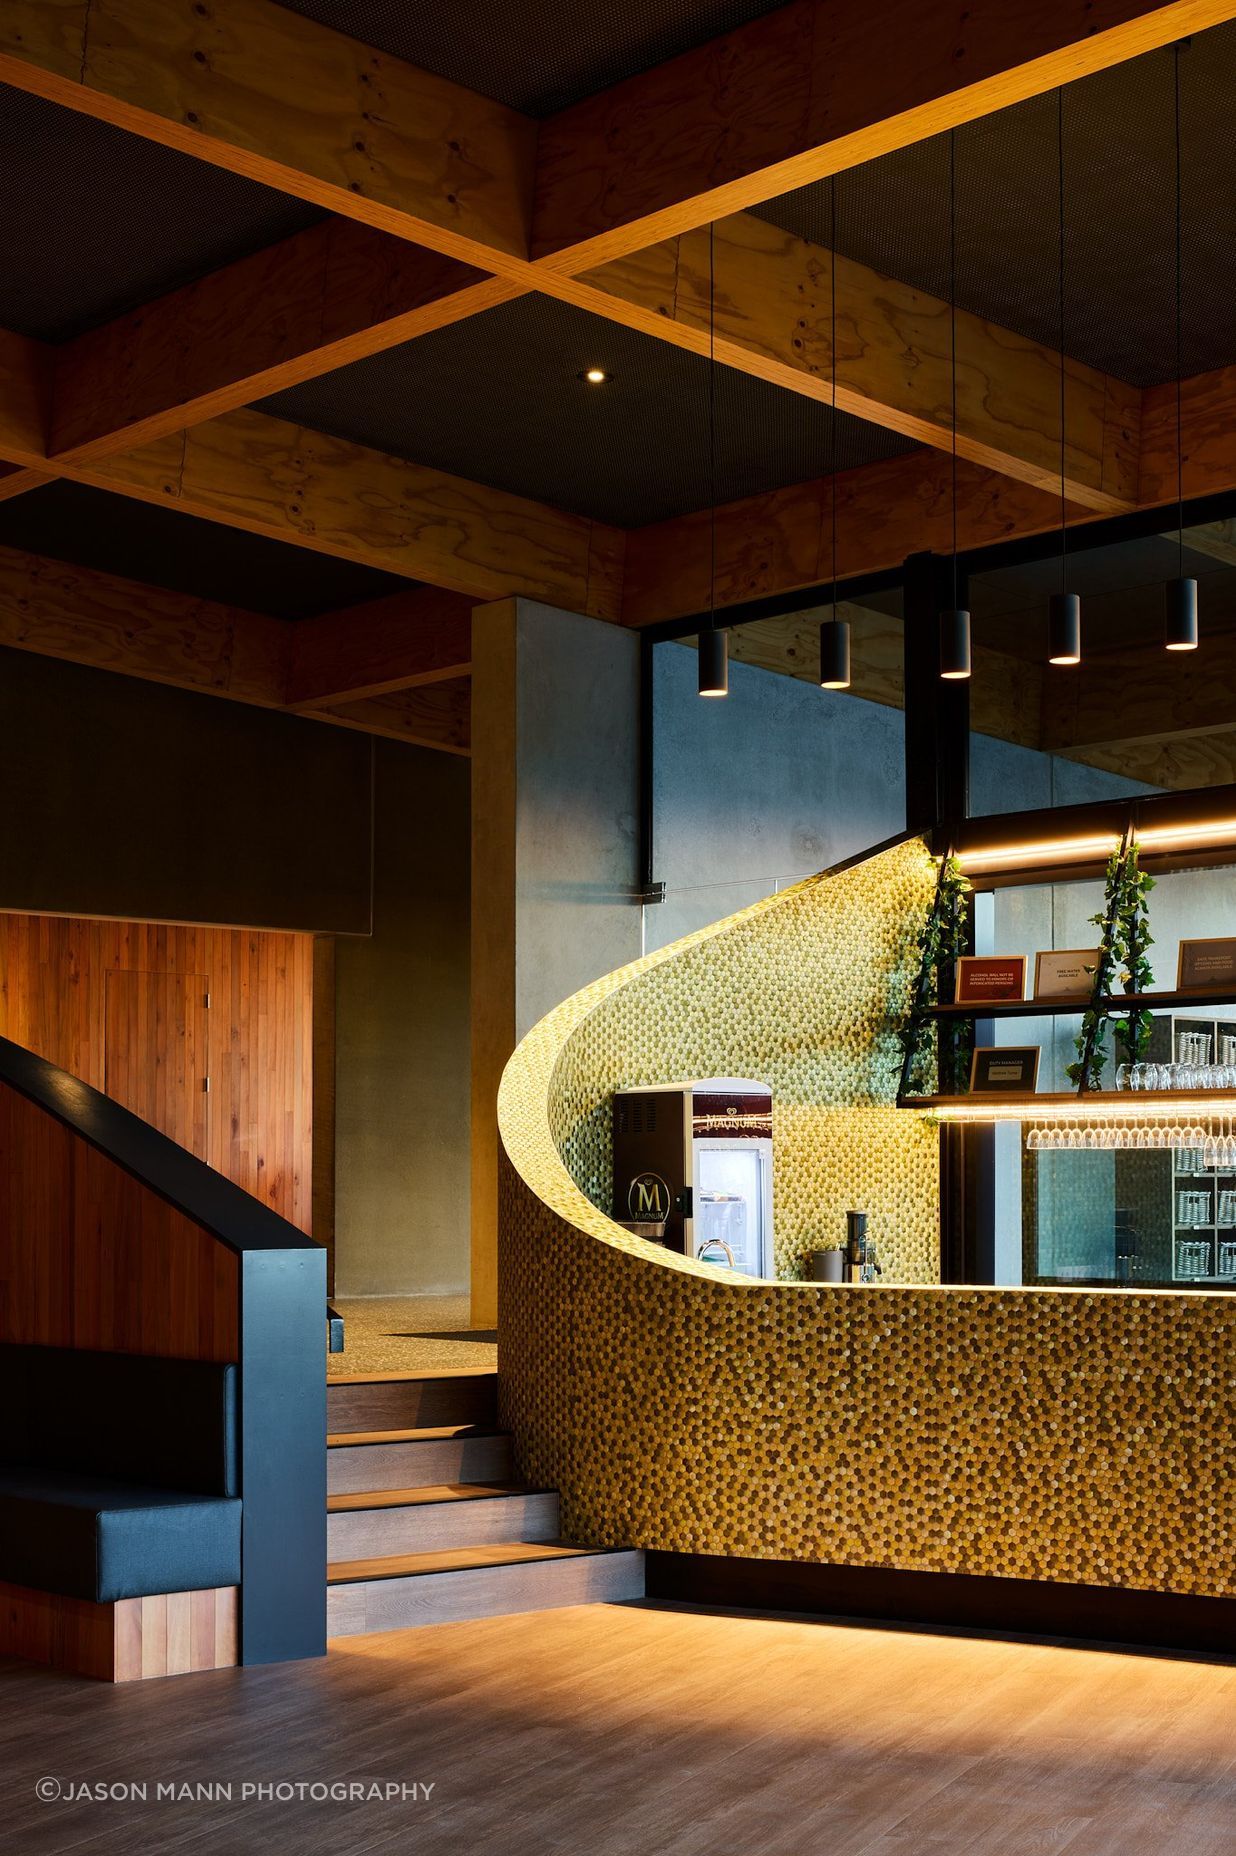 The cafe and bar features a sweeping, curved wall and reclaimed timber cladding.